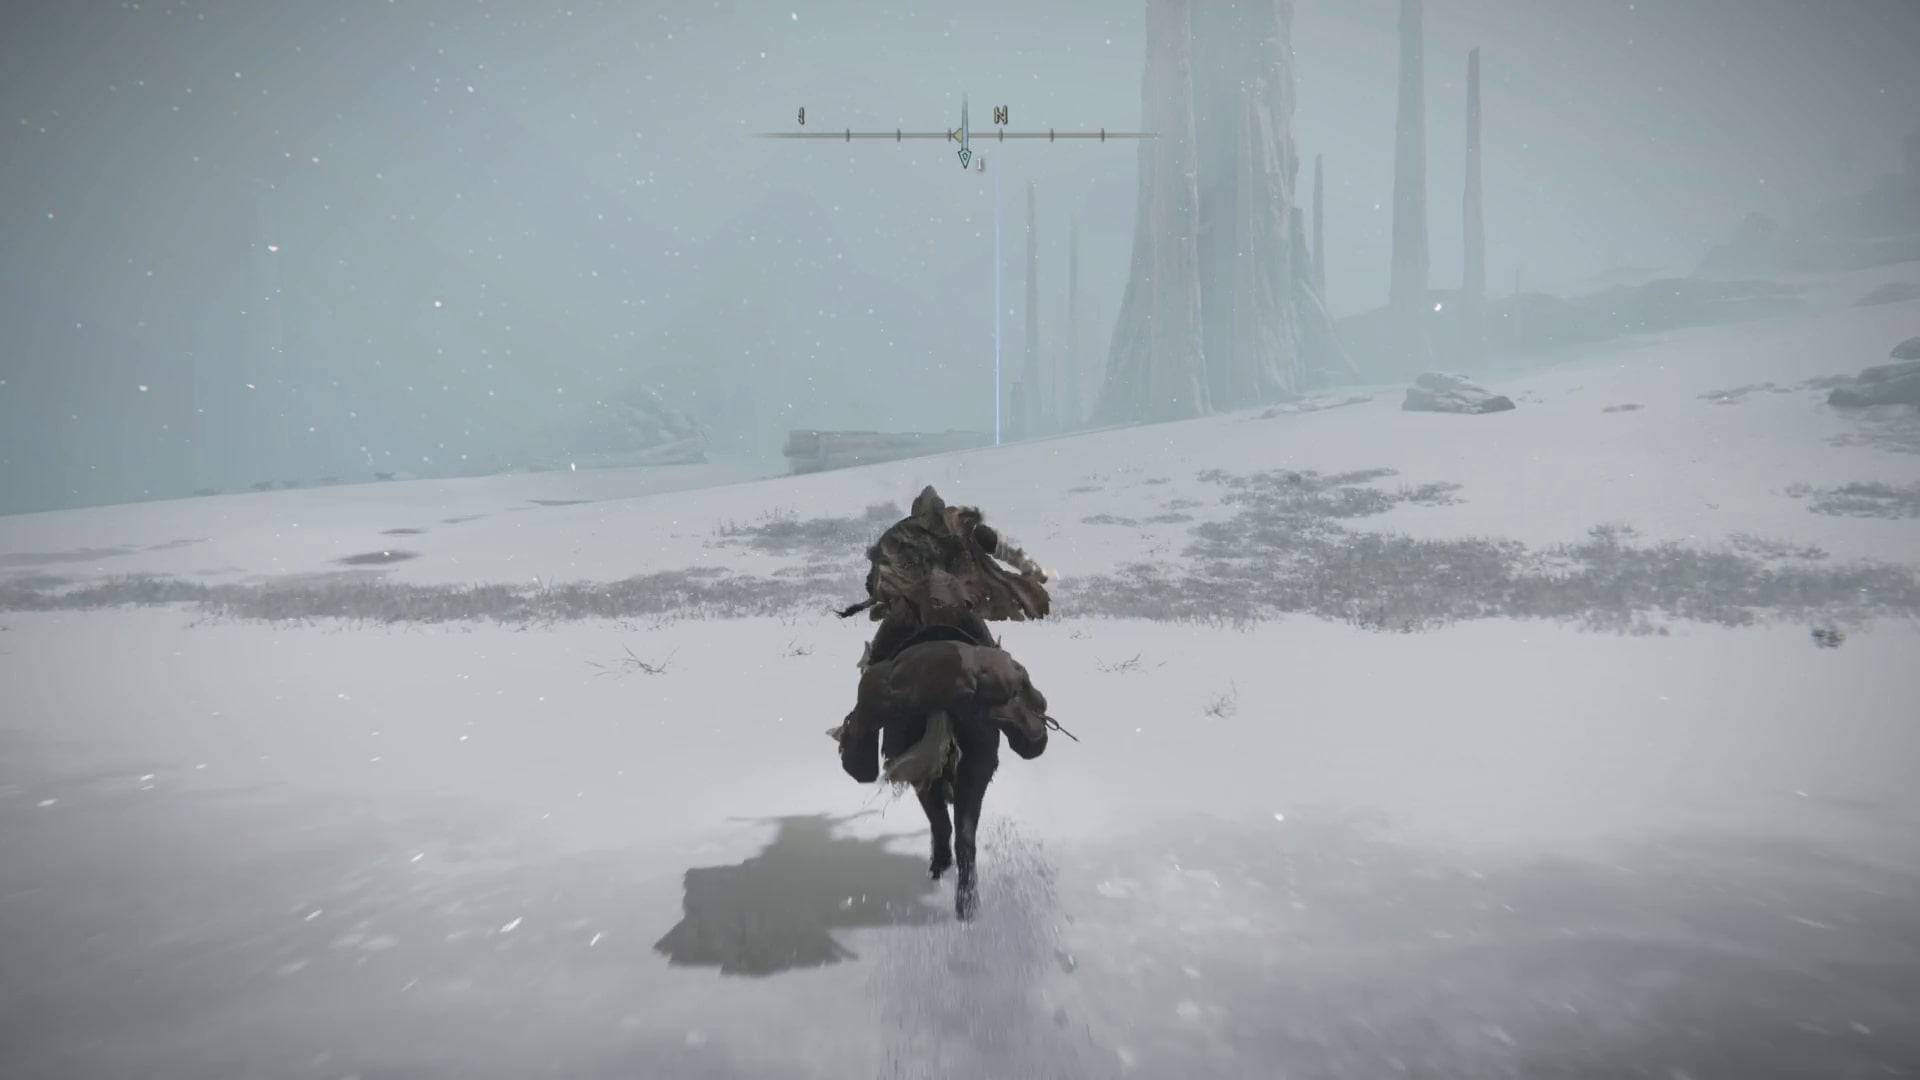 How to get to the Elden Ring Consecrated Snowfield